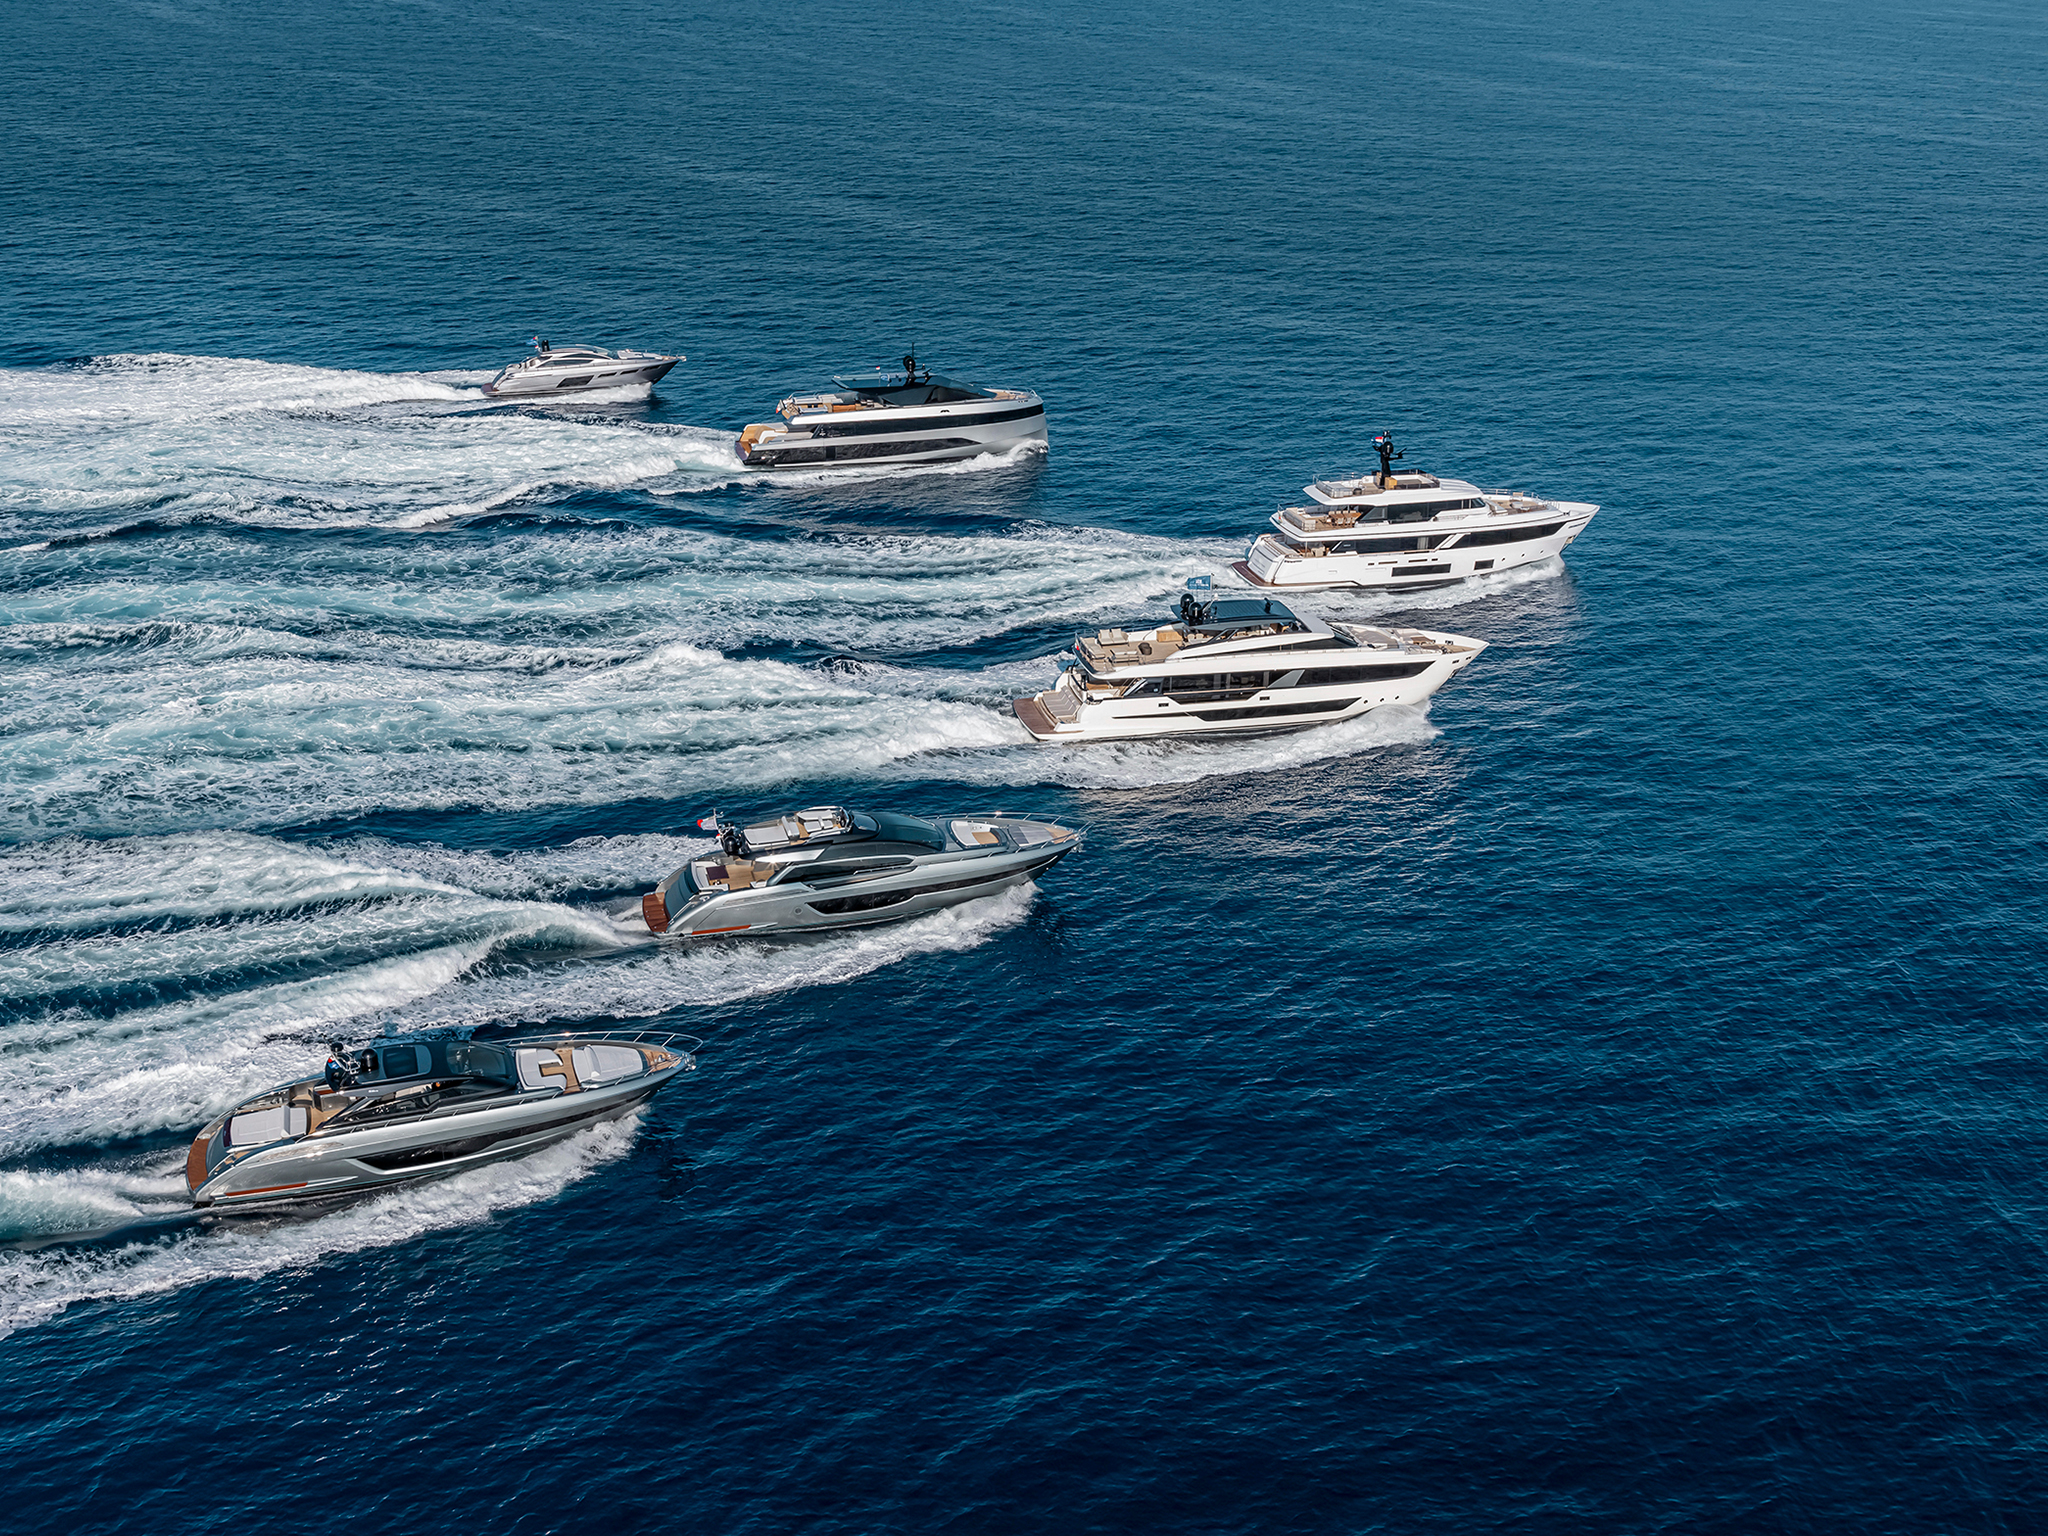 Ferretti Group is back on stage at the Cannes Yachting Festival with five outstanding premieres and record-breaking half-year. 